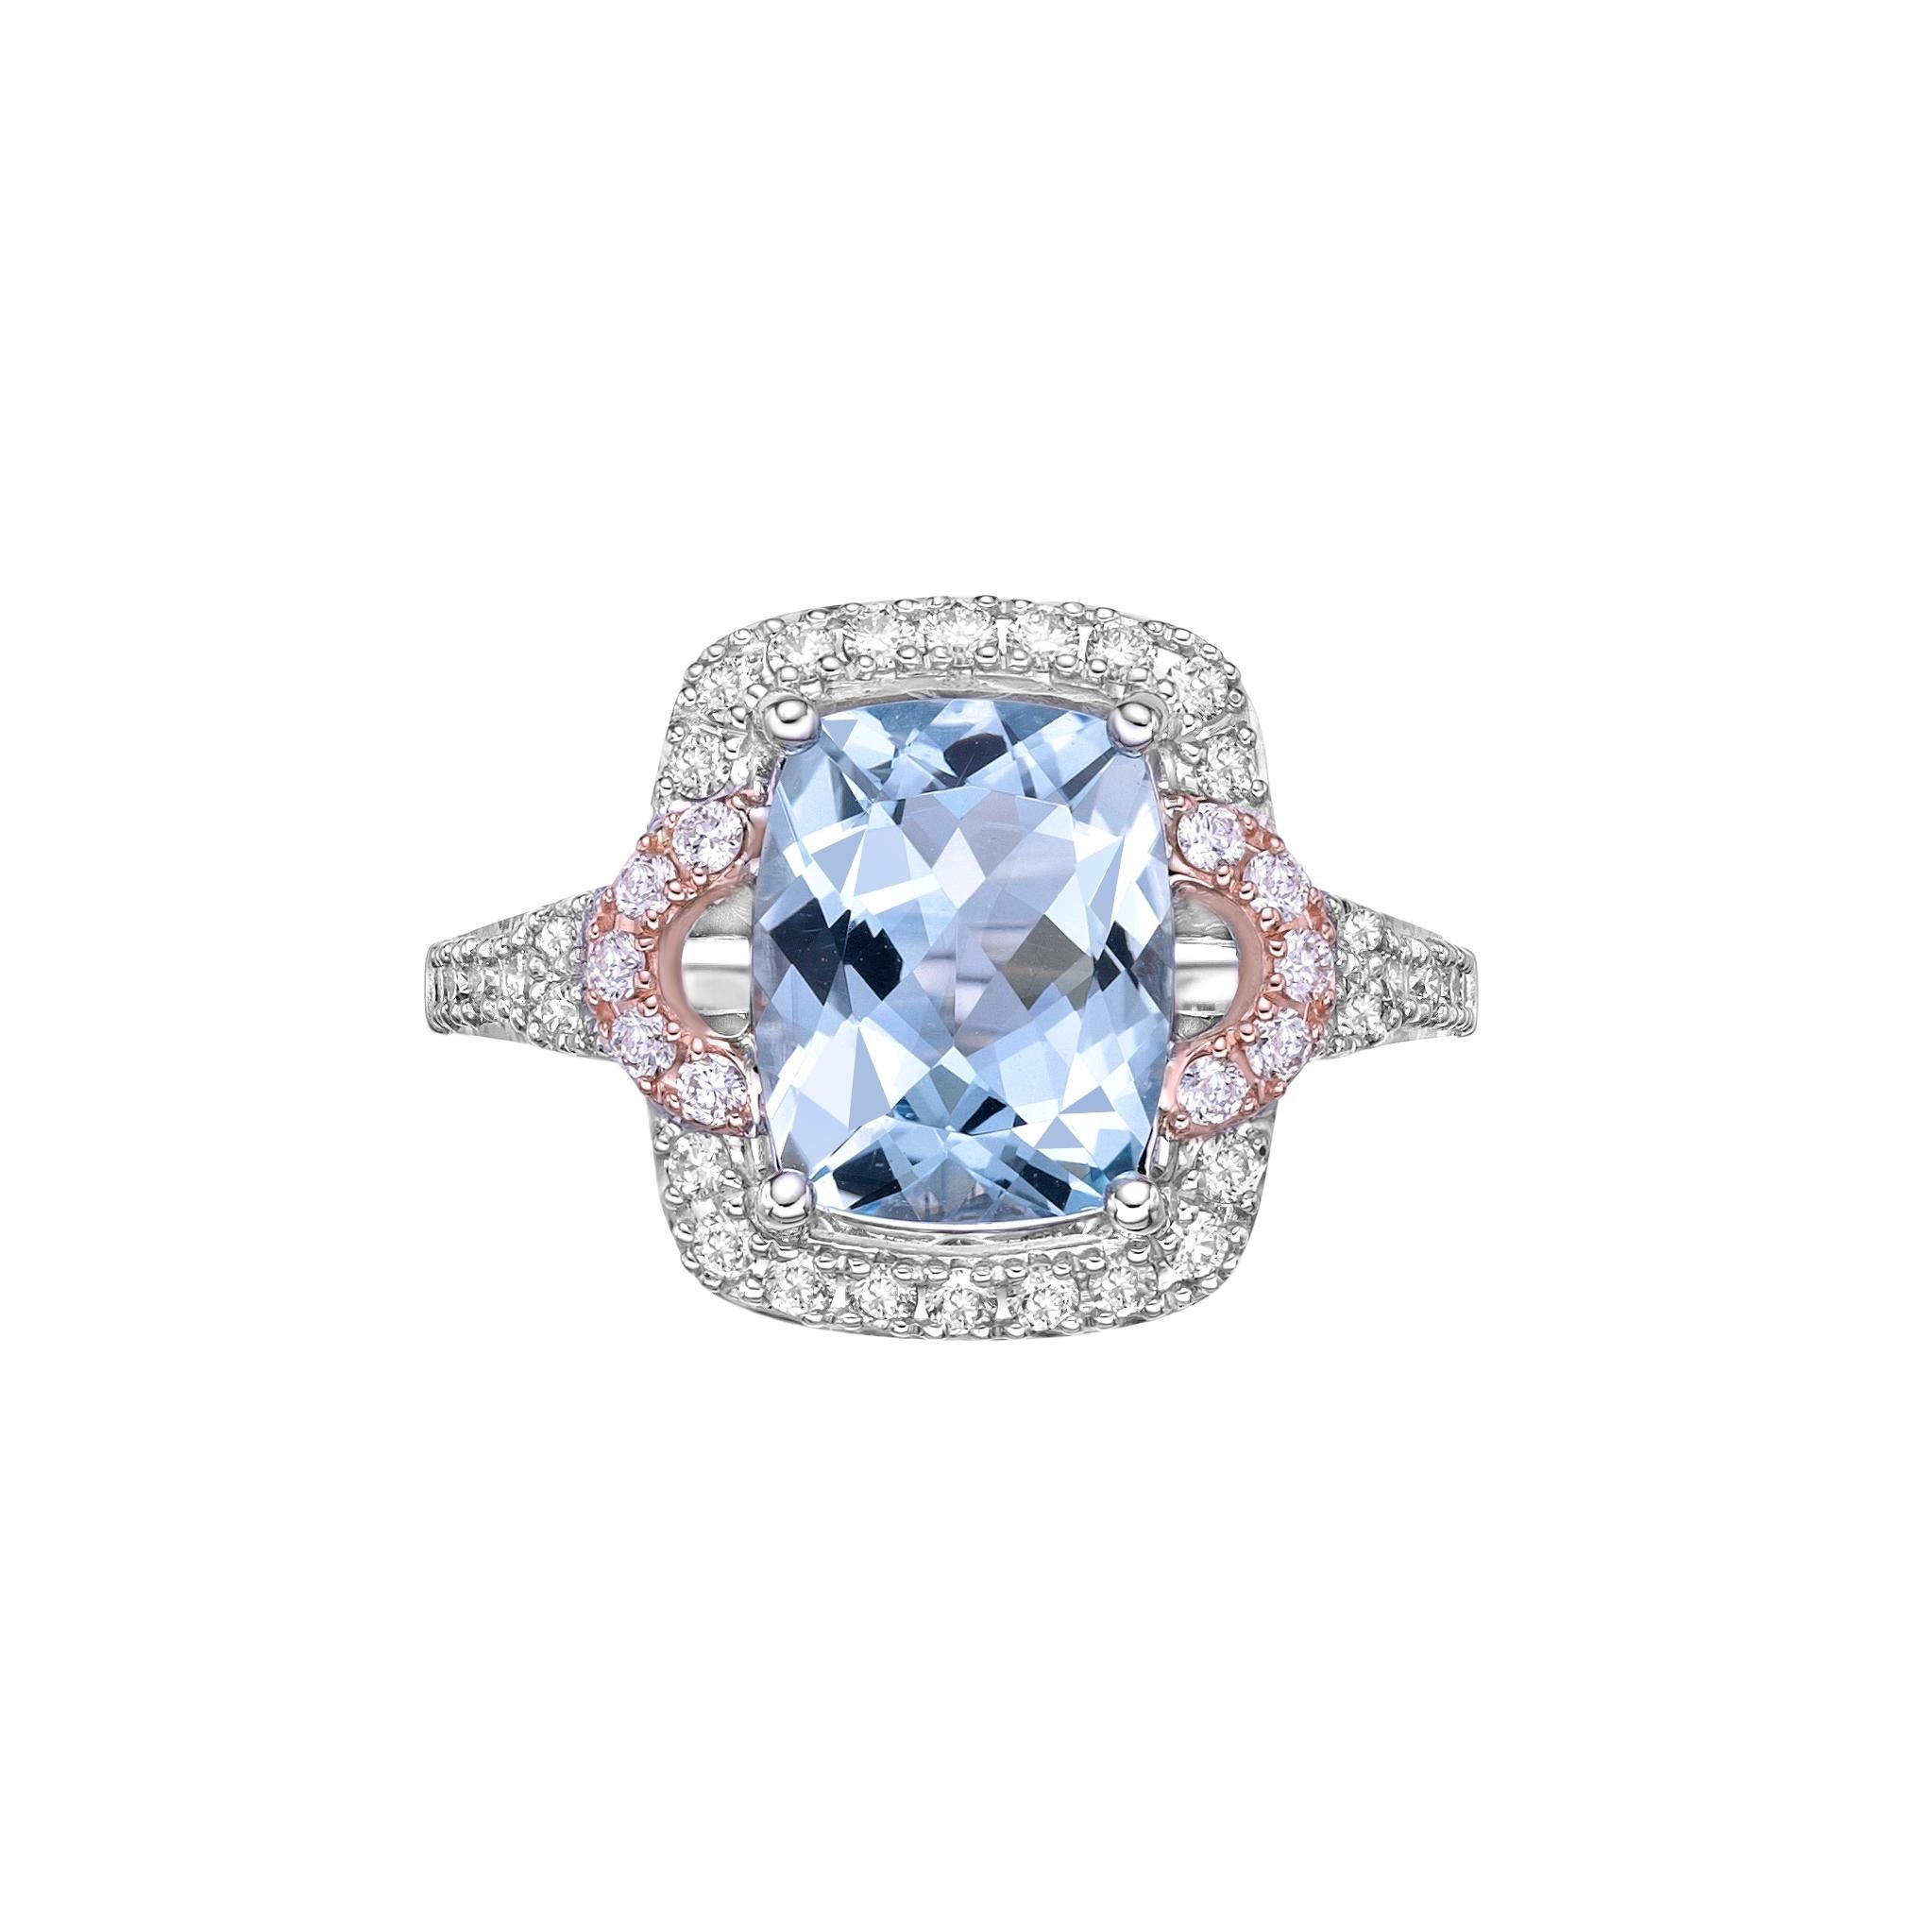 Contemporary 2.38 Carat Aquamarine Fancy Ring in 18Karat White Rose Gold with Diamond.   For Sale